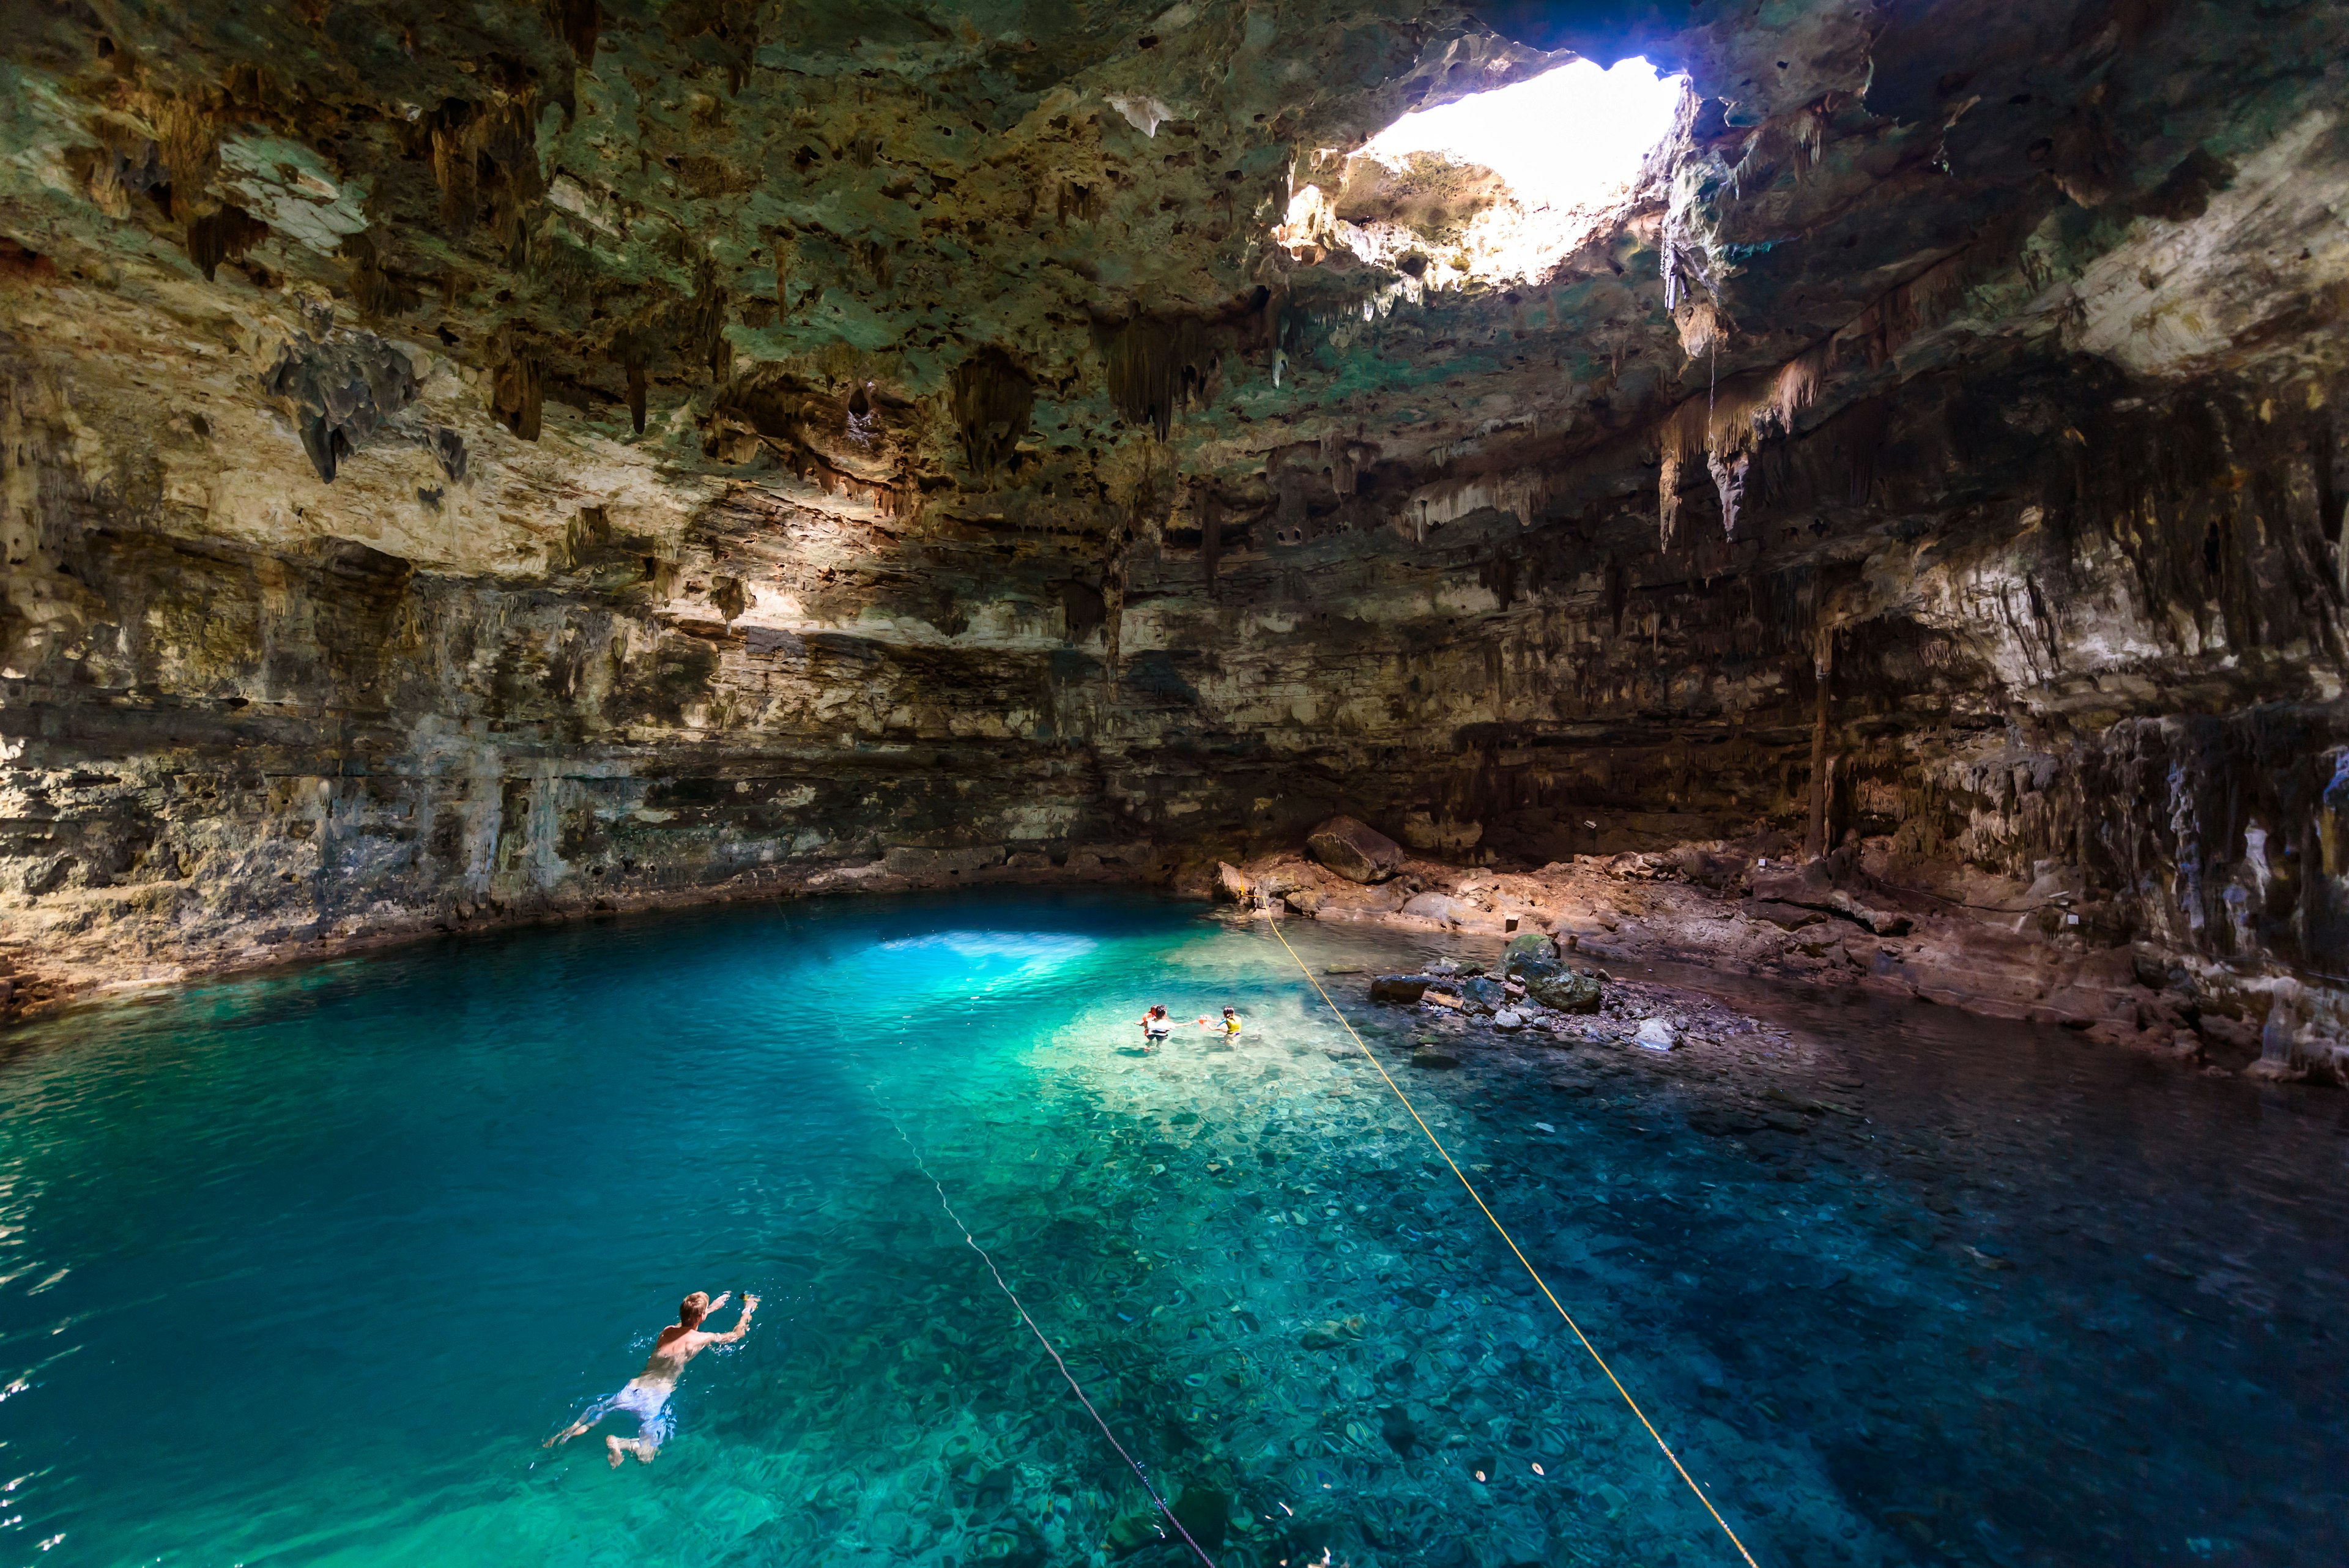 People swimming in crystal blue water at Cenote Samula Dzitnup near Valladolid.